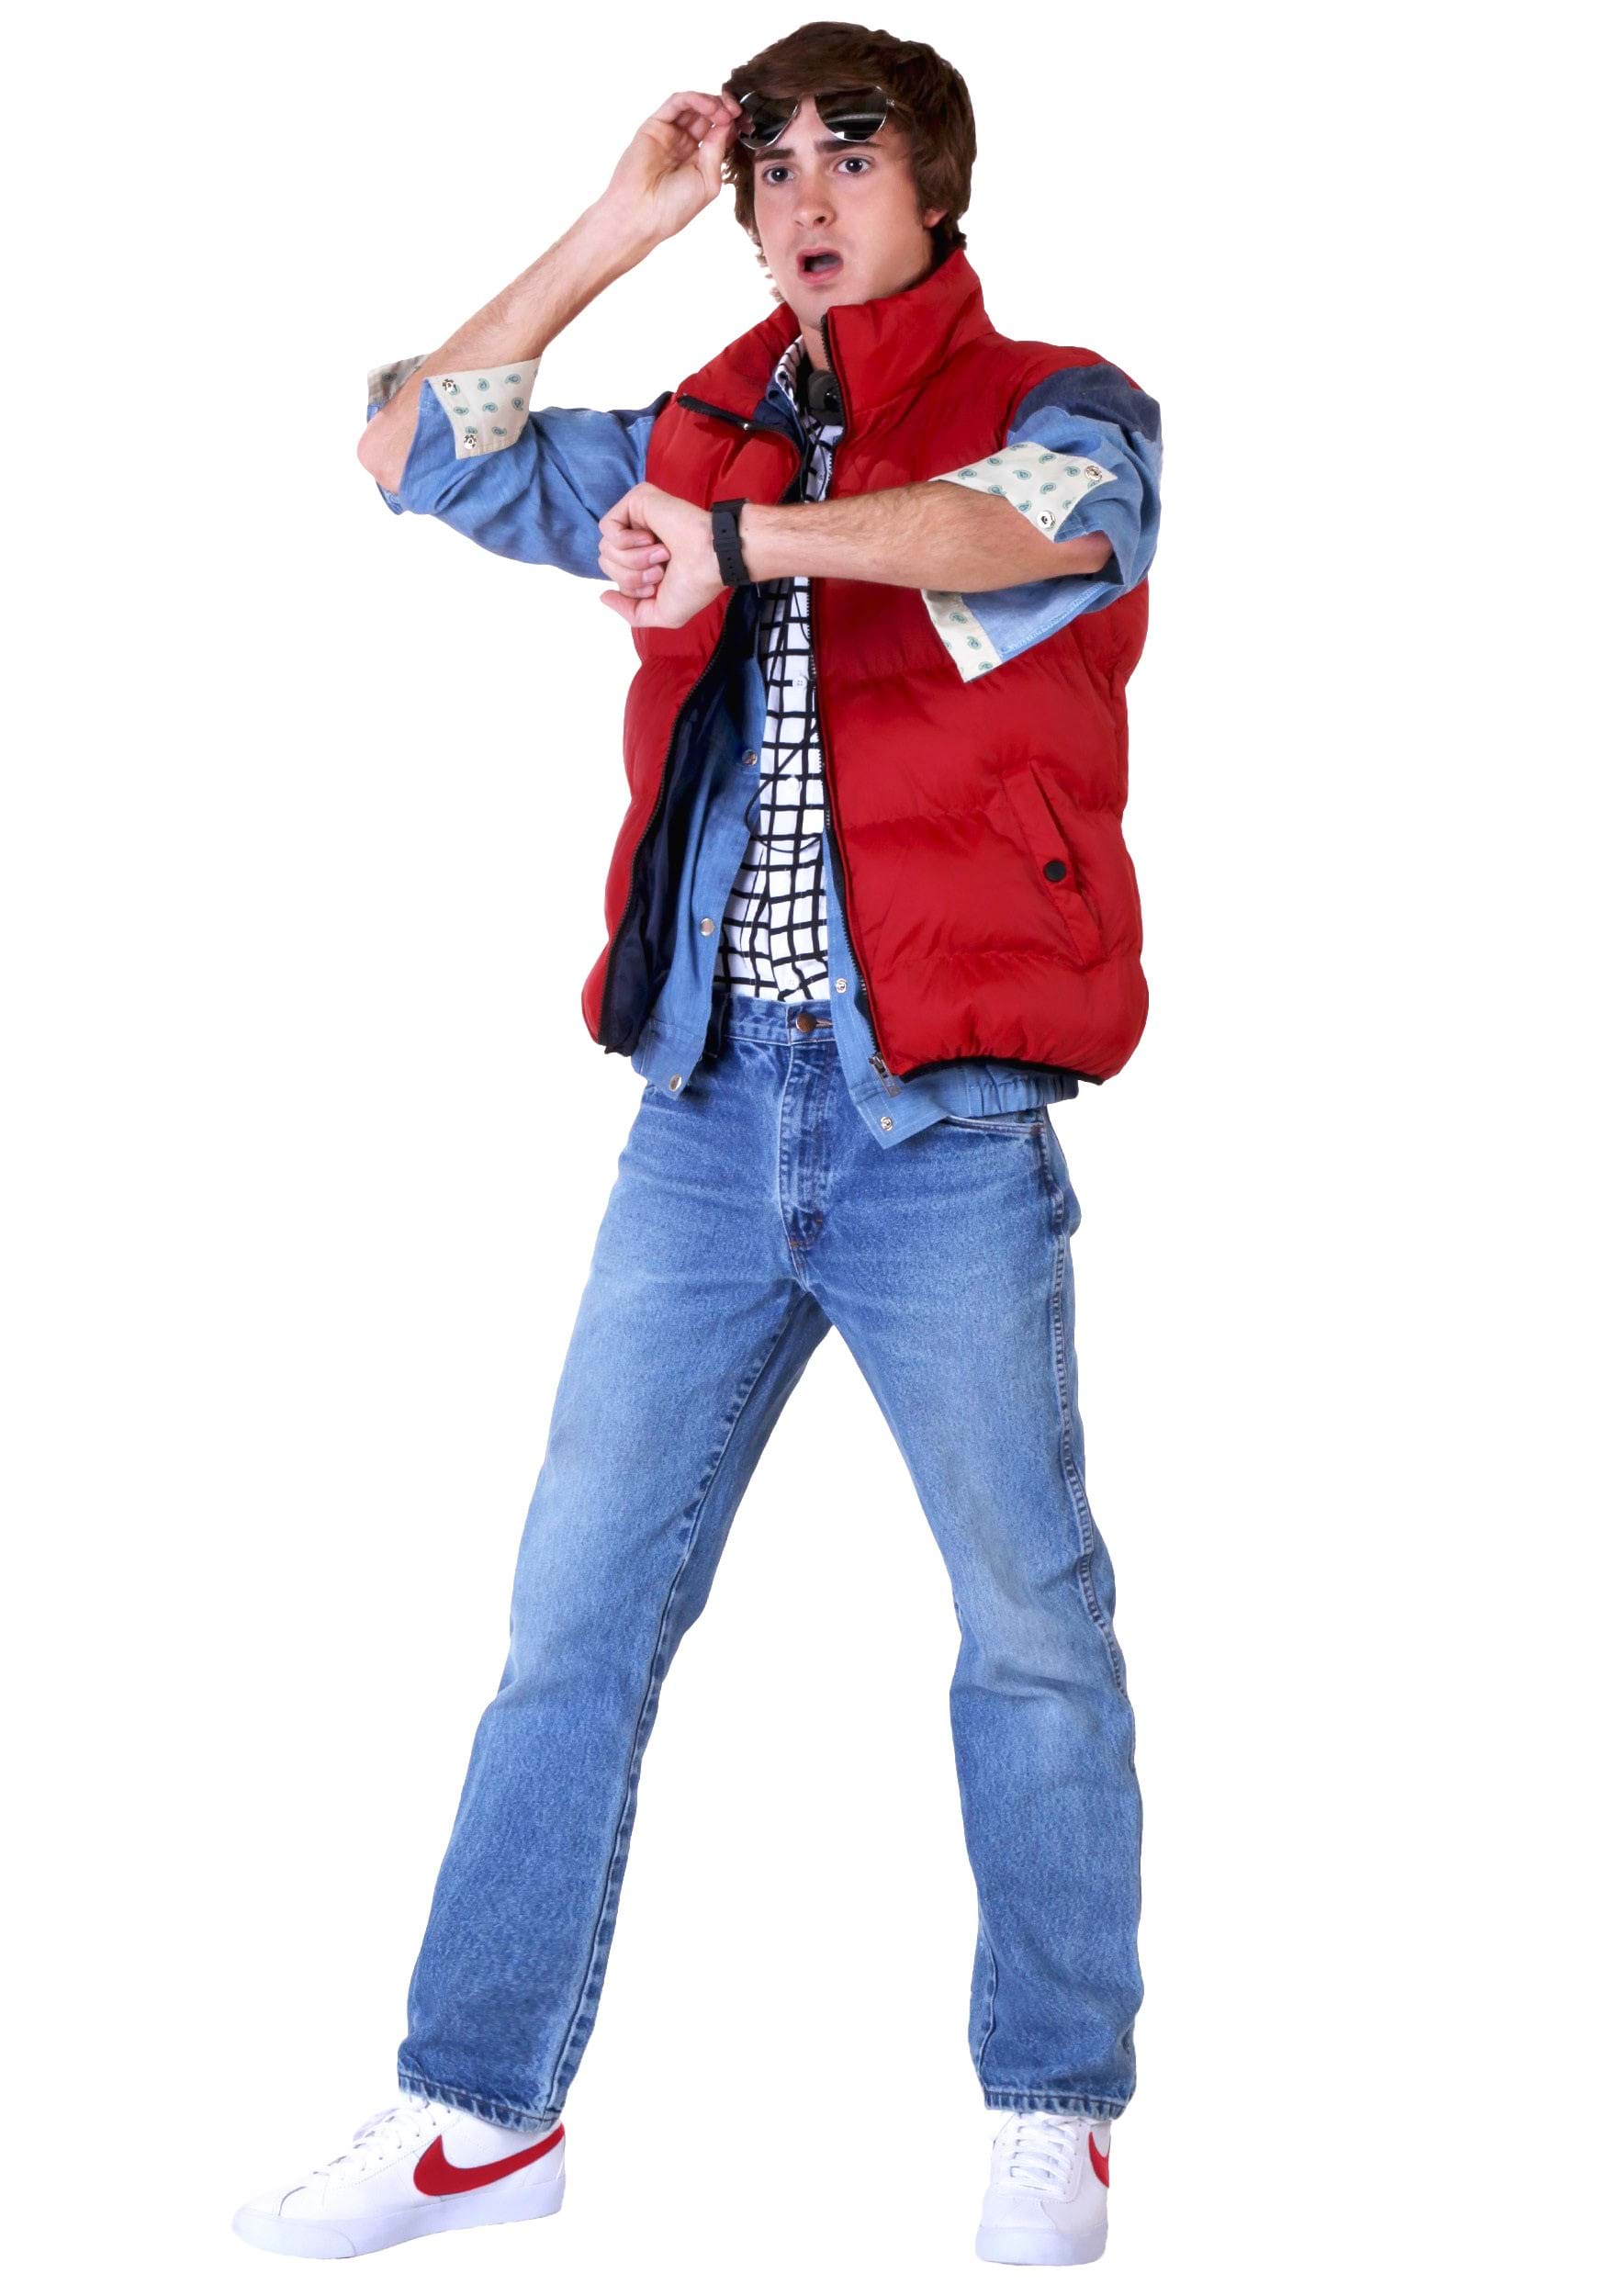 Marty McFly Back to the Future Costume | 80s Movies Costume